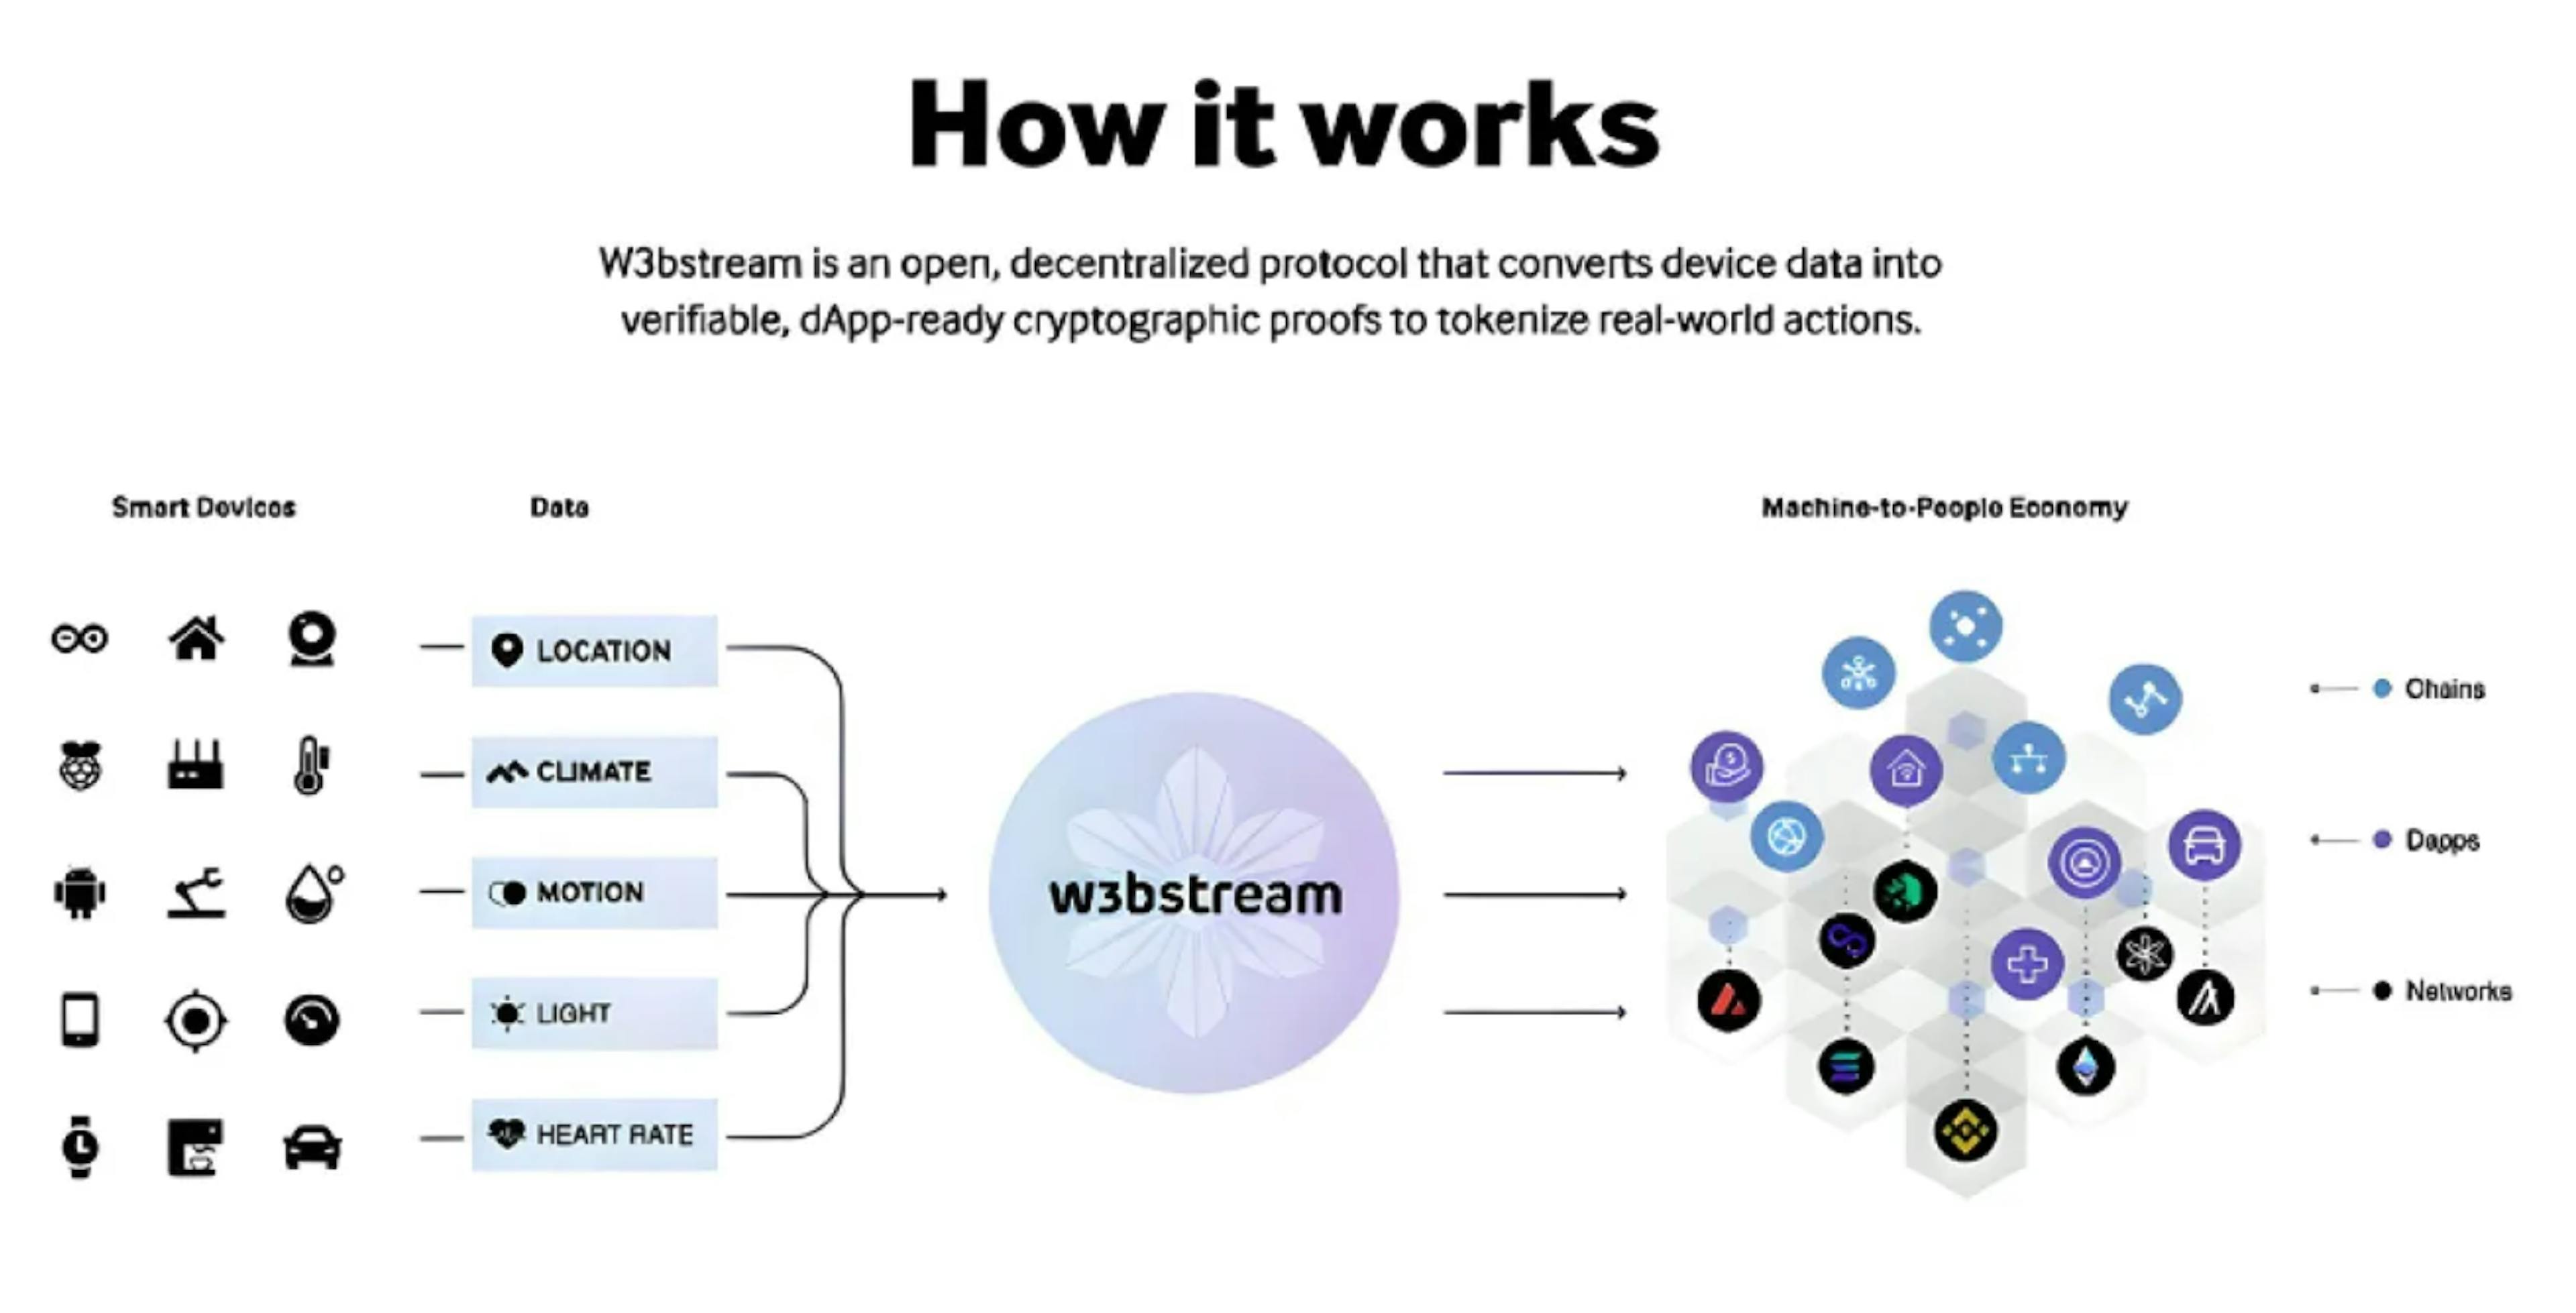 W3bstream securely ingests data from physical infrastructure and injects insights and actions back into the decentralized market